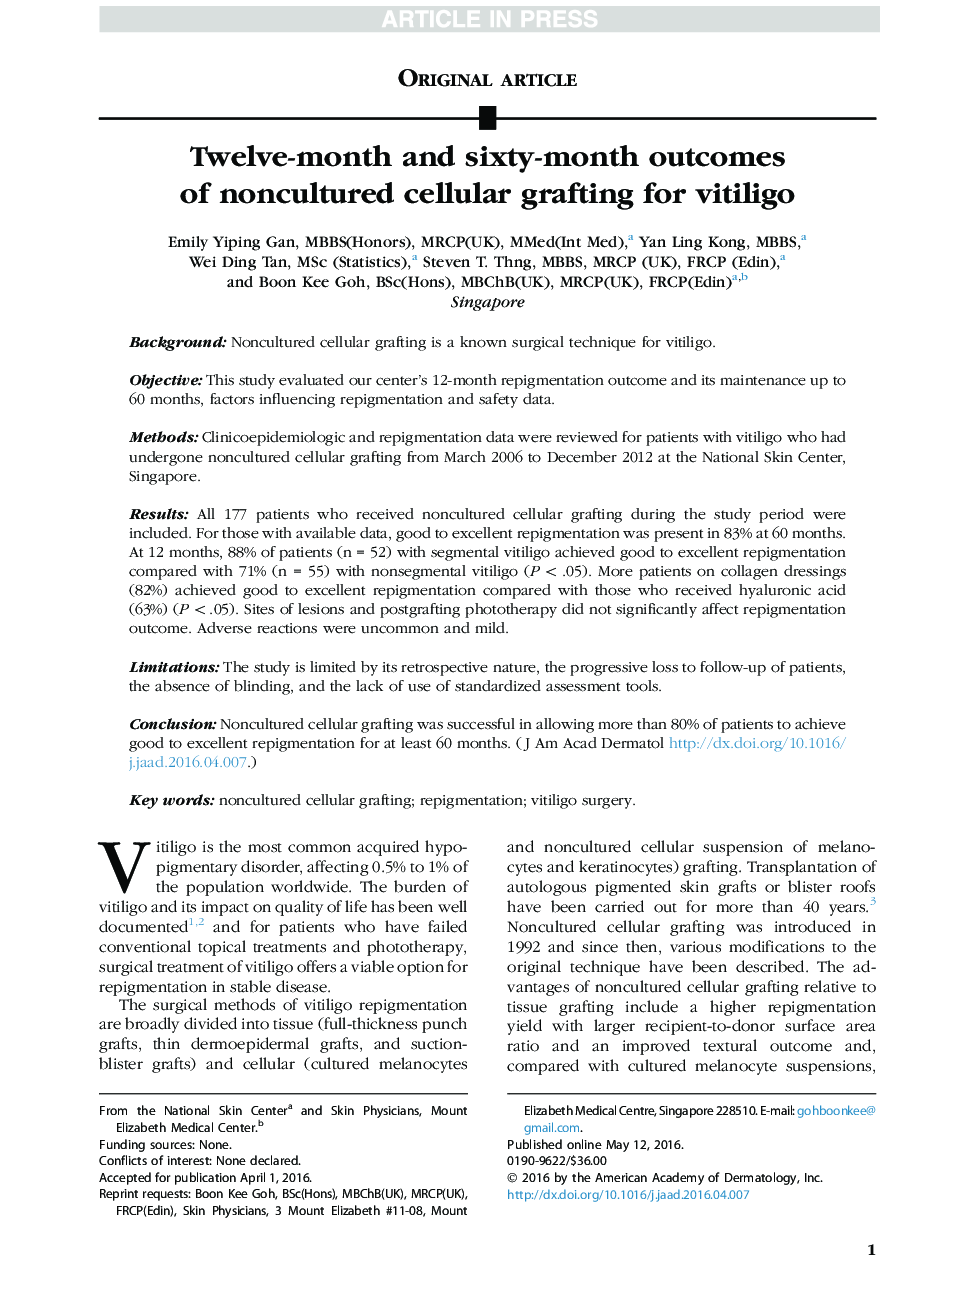 Twelve-month and sixty-month outcomes of noncultured cellular grafting for vitiligo